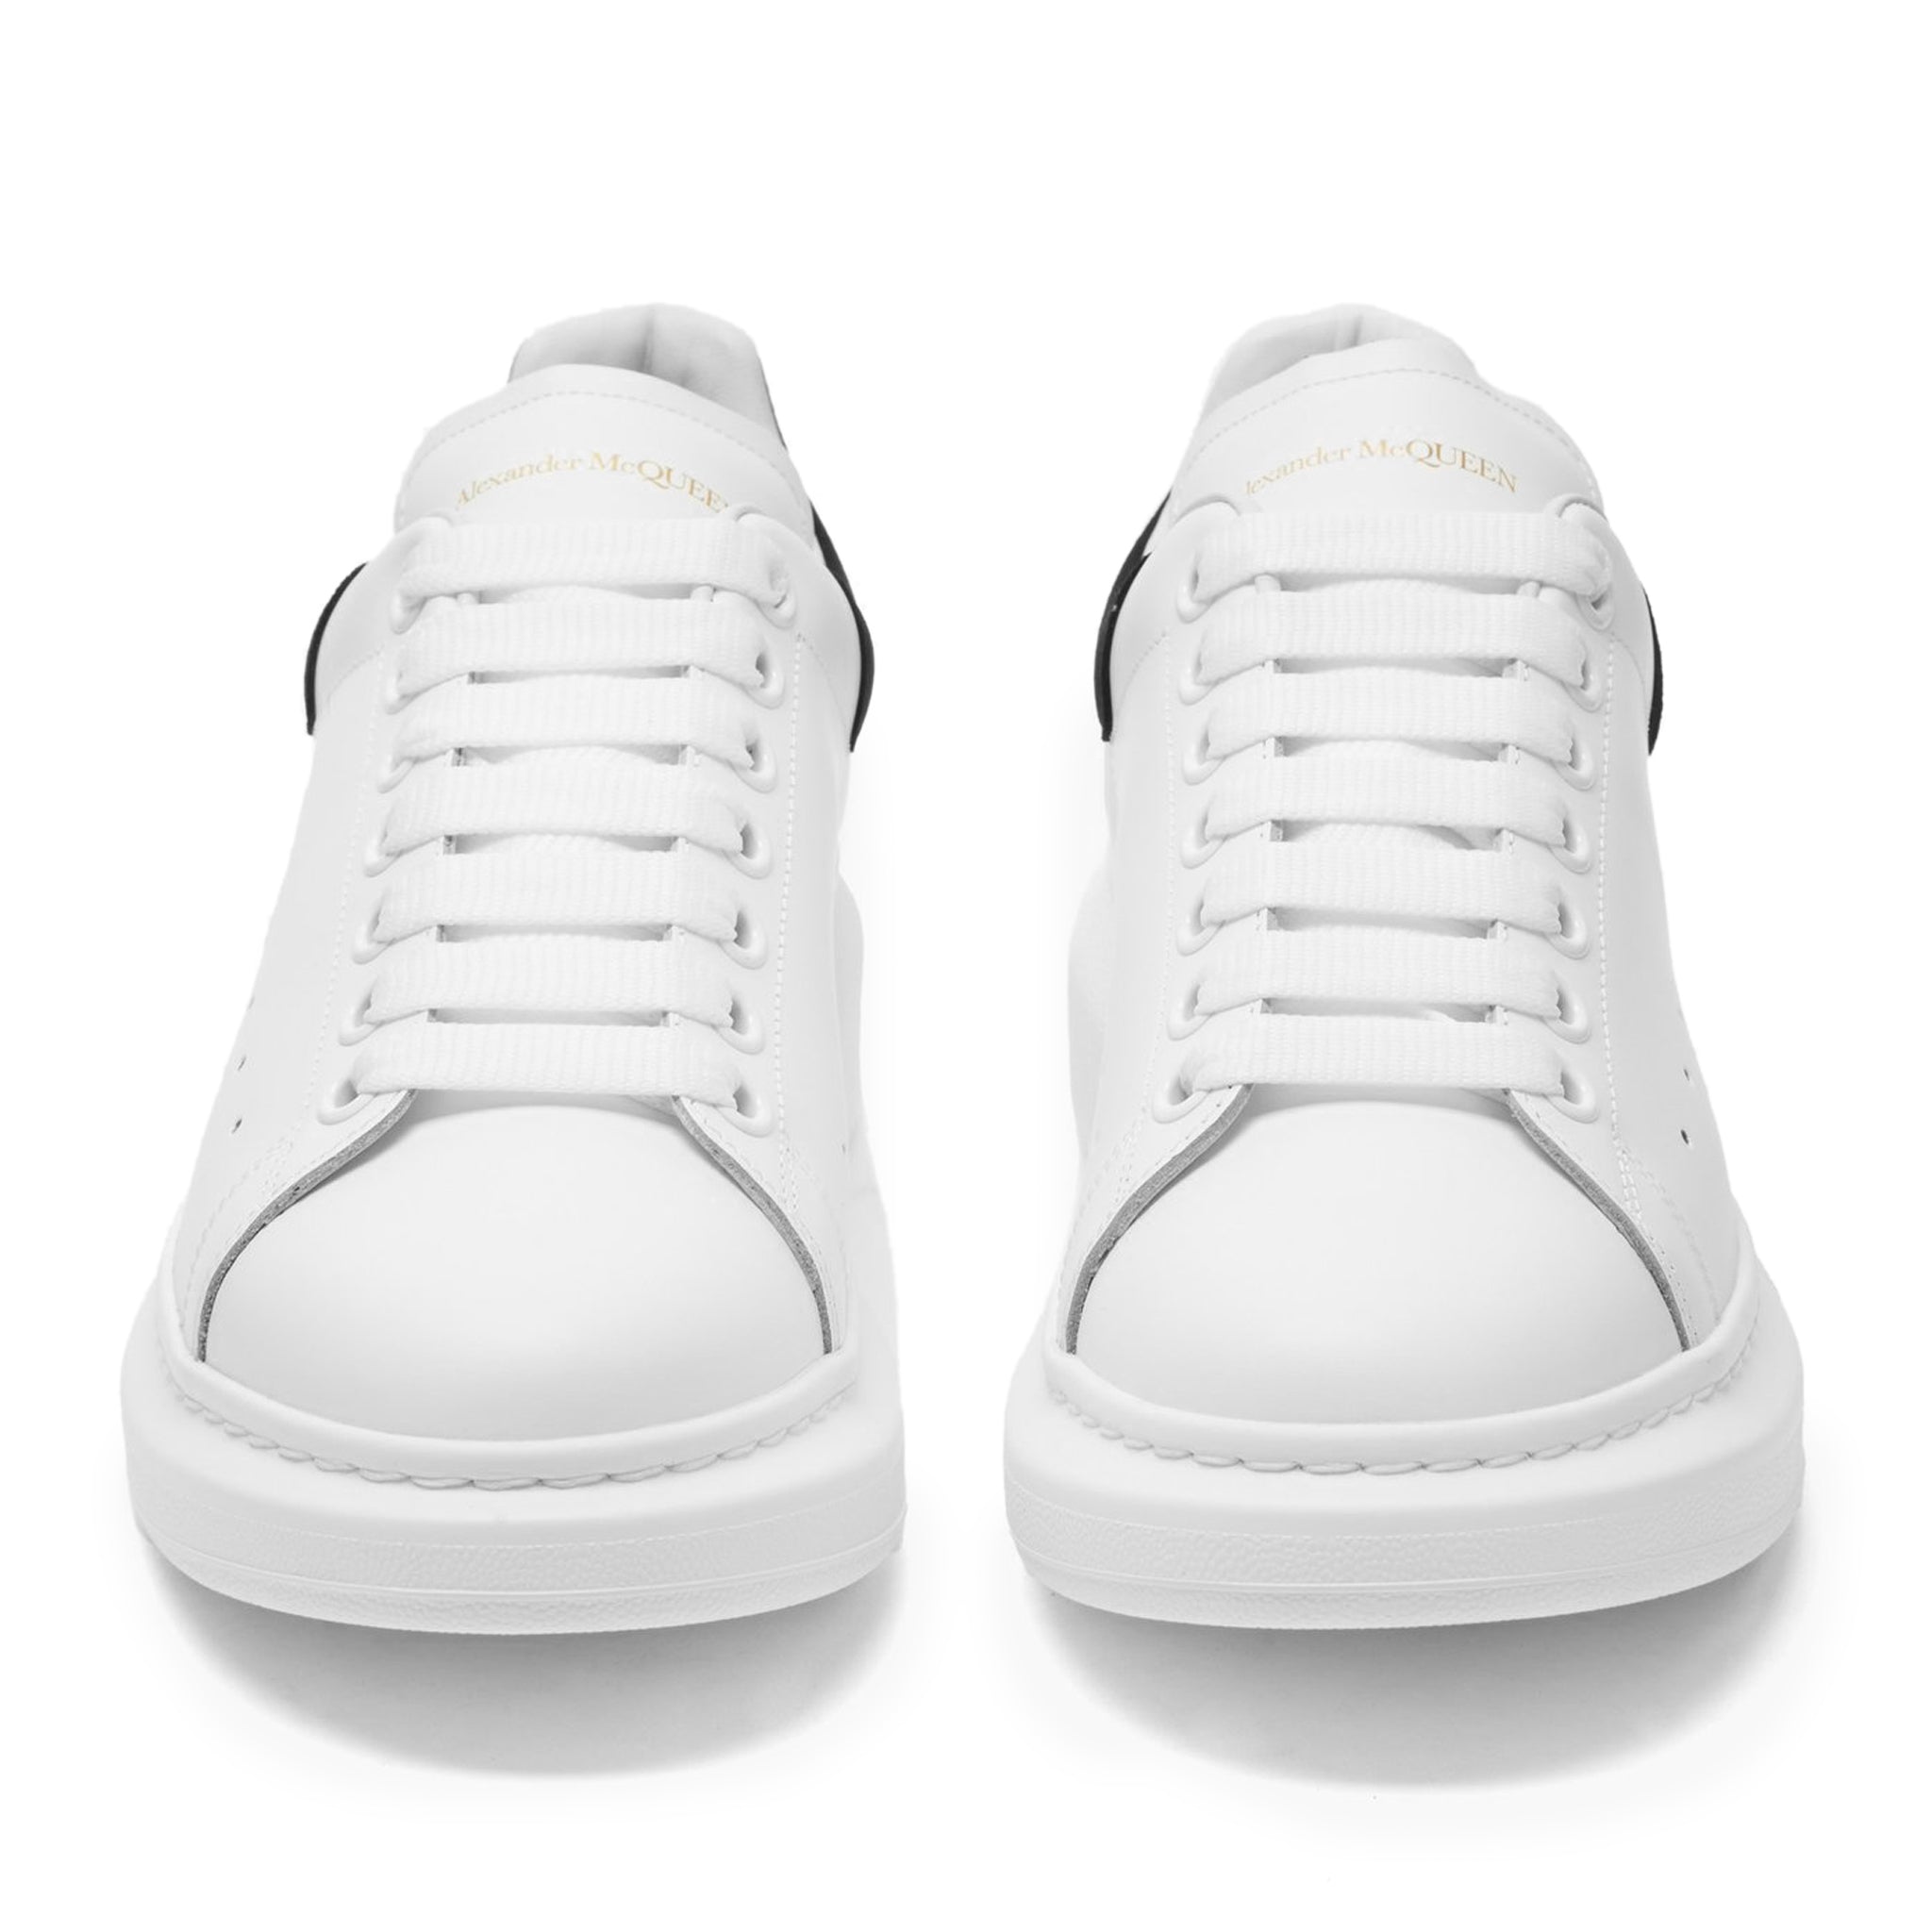 OLace view of Alexander Mcqueen Raised Sole White Black Suede Sneaker